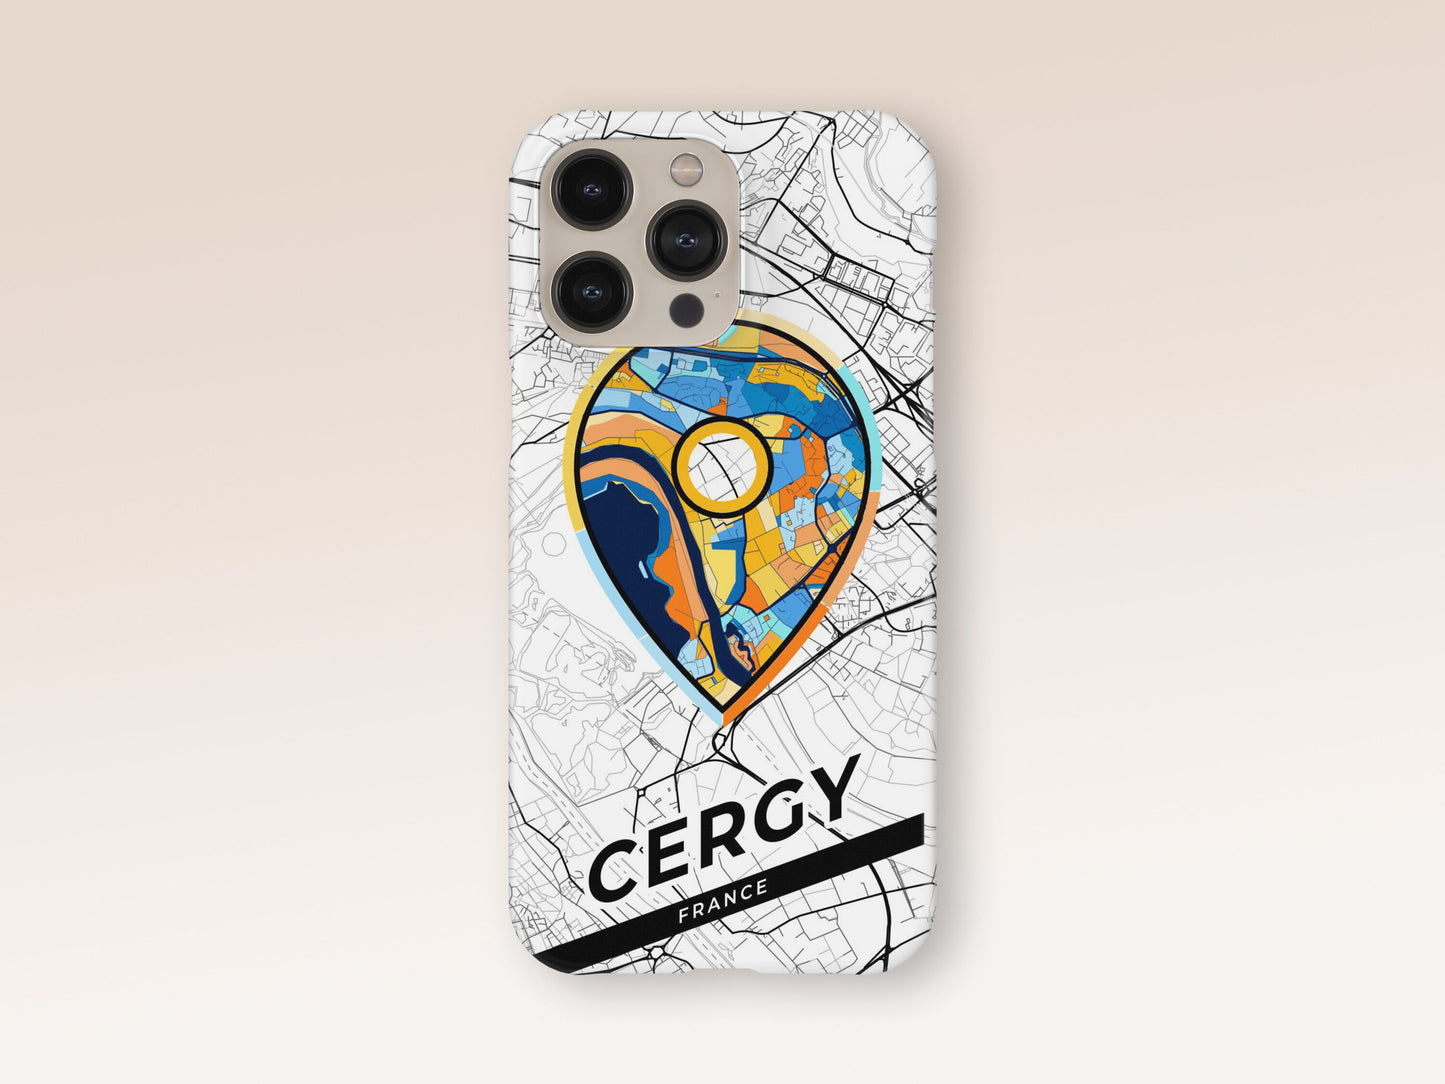 Cergy France slim phone case with colorful icon. Birthday, wedding or housewarming gift. Couple match cases. 1